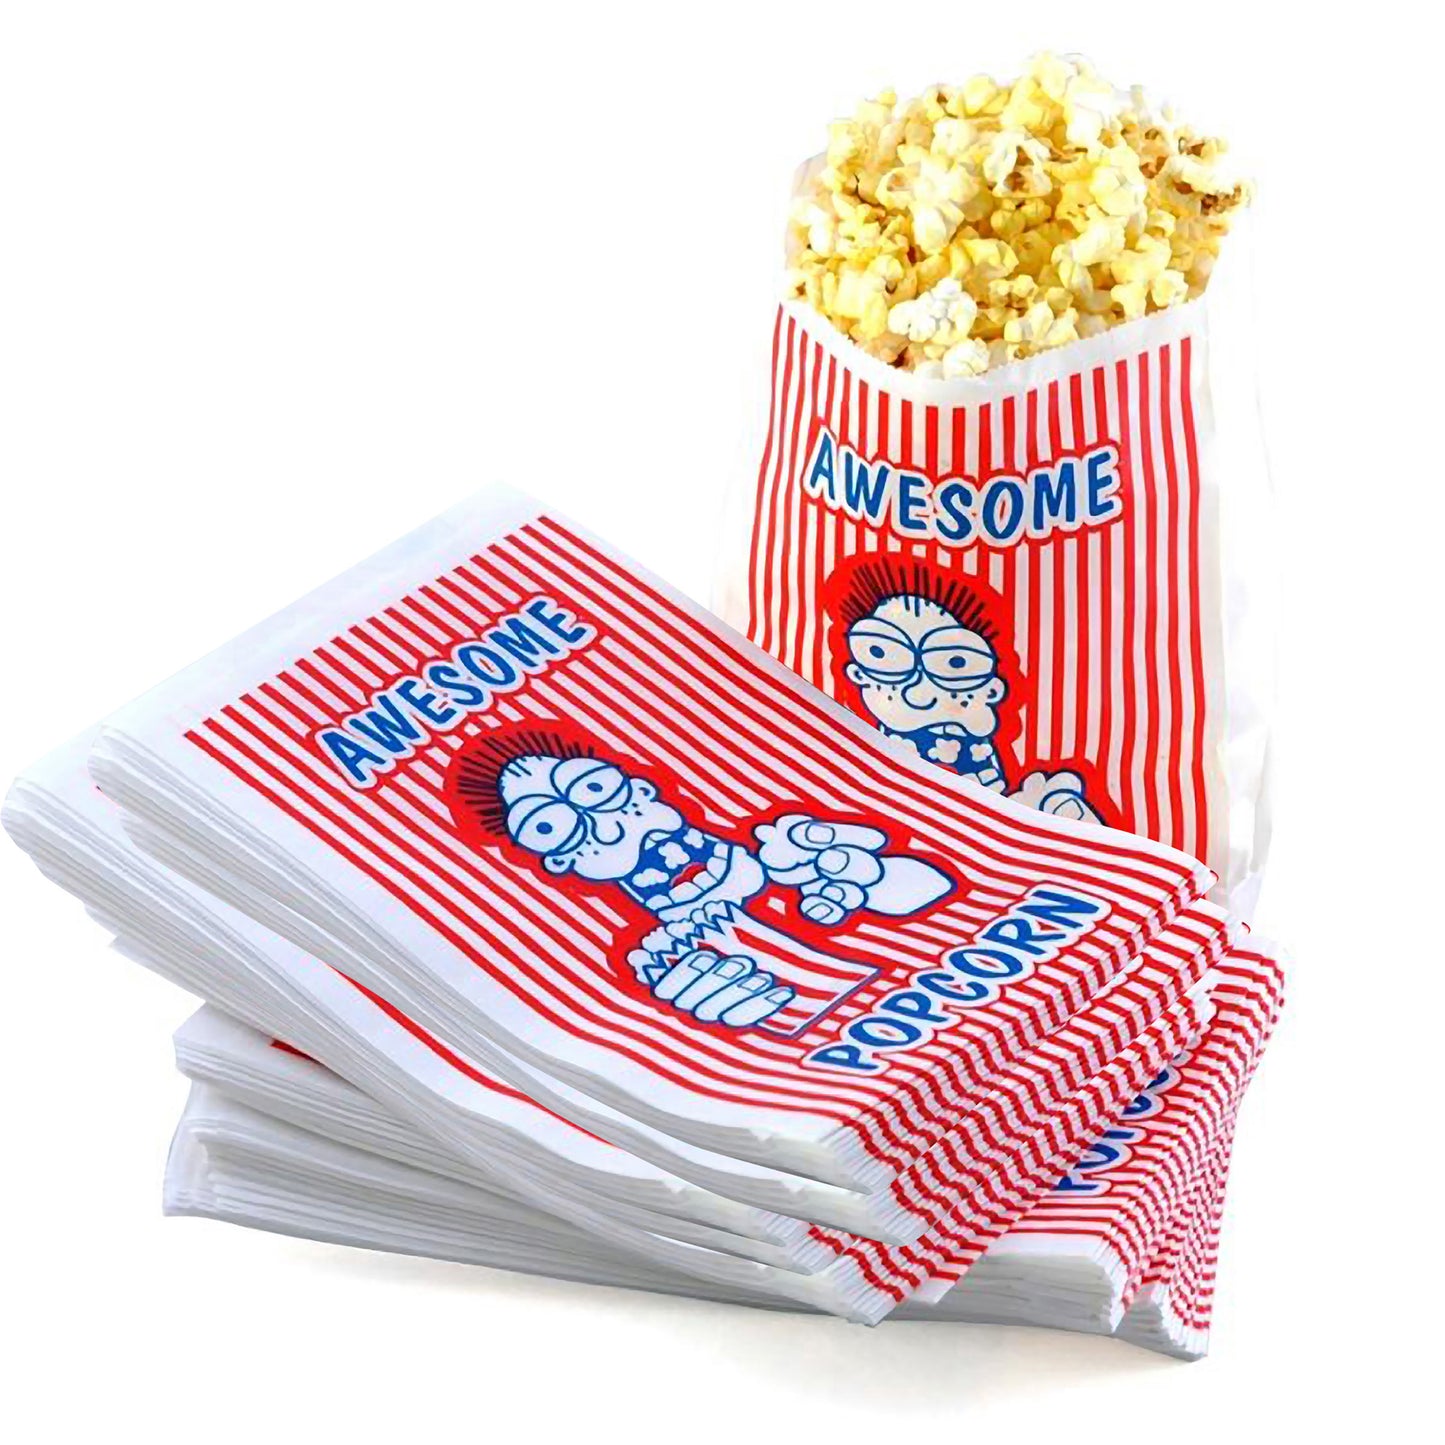 100 Popcorn Bags and 6 Ounce All-in-One Popcorn Packs  – Case of 24